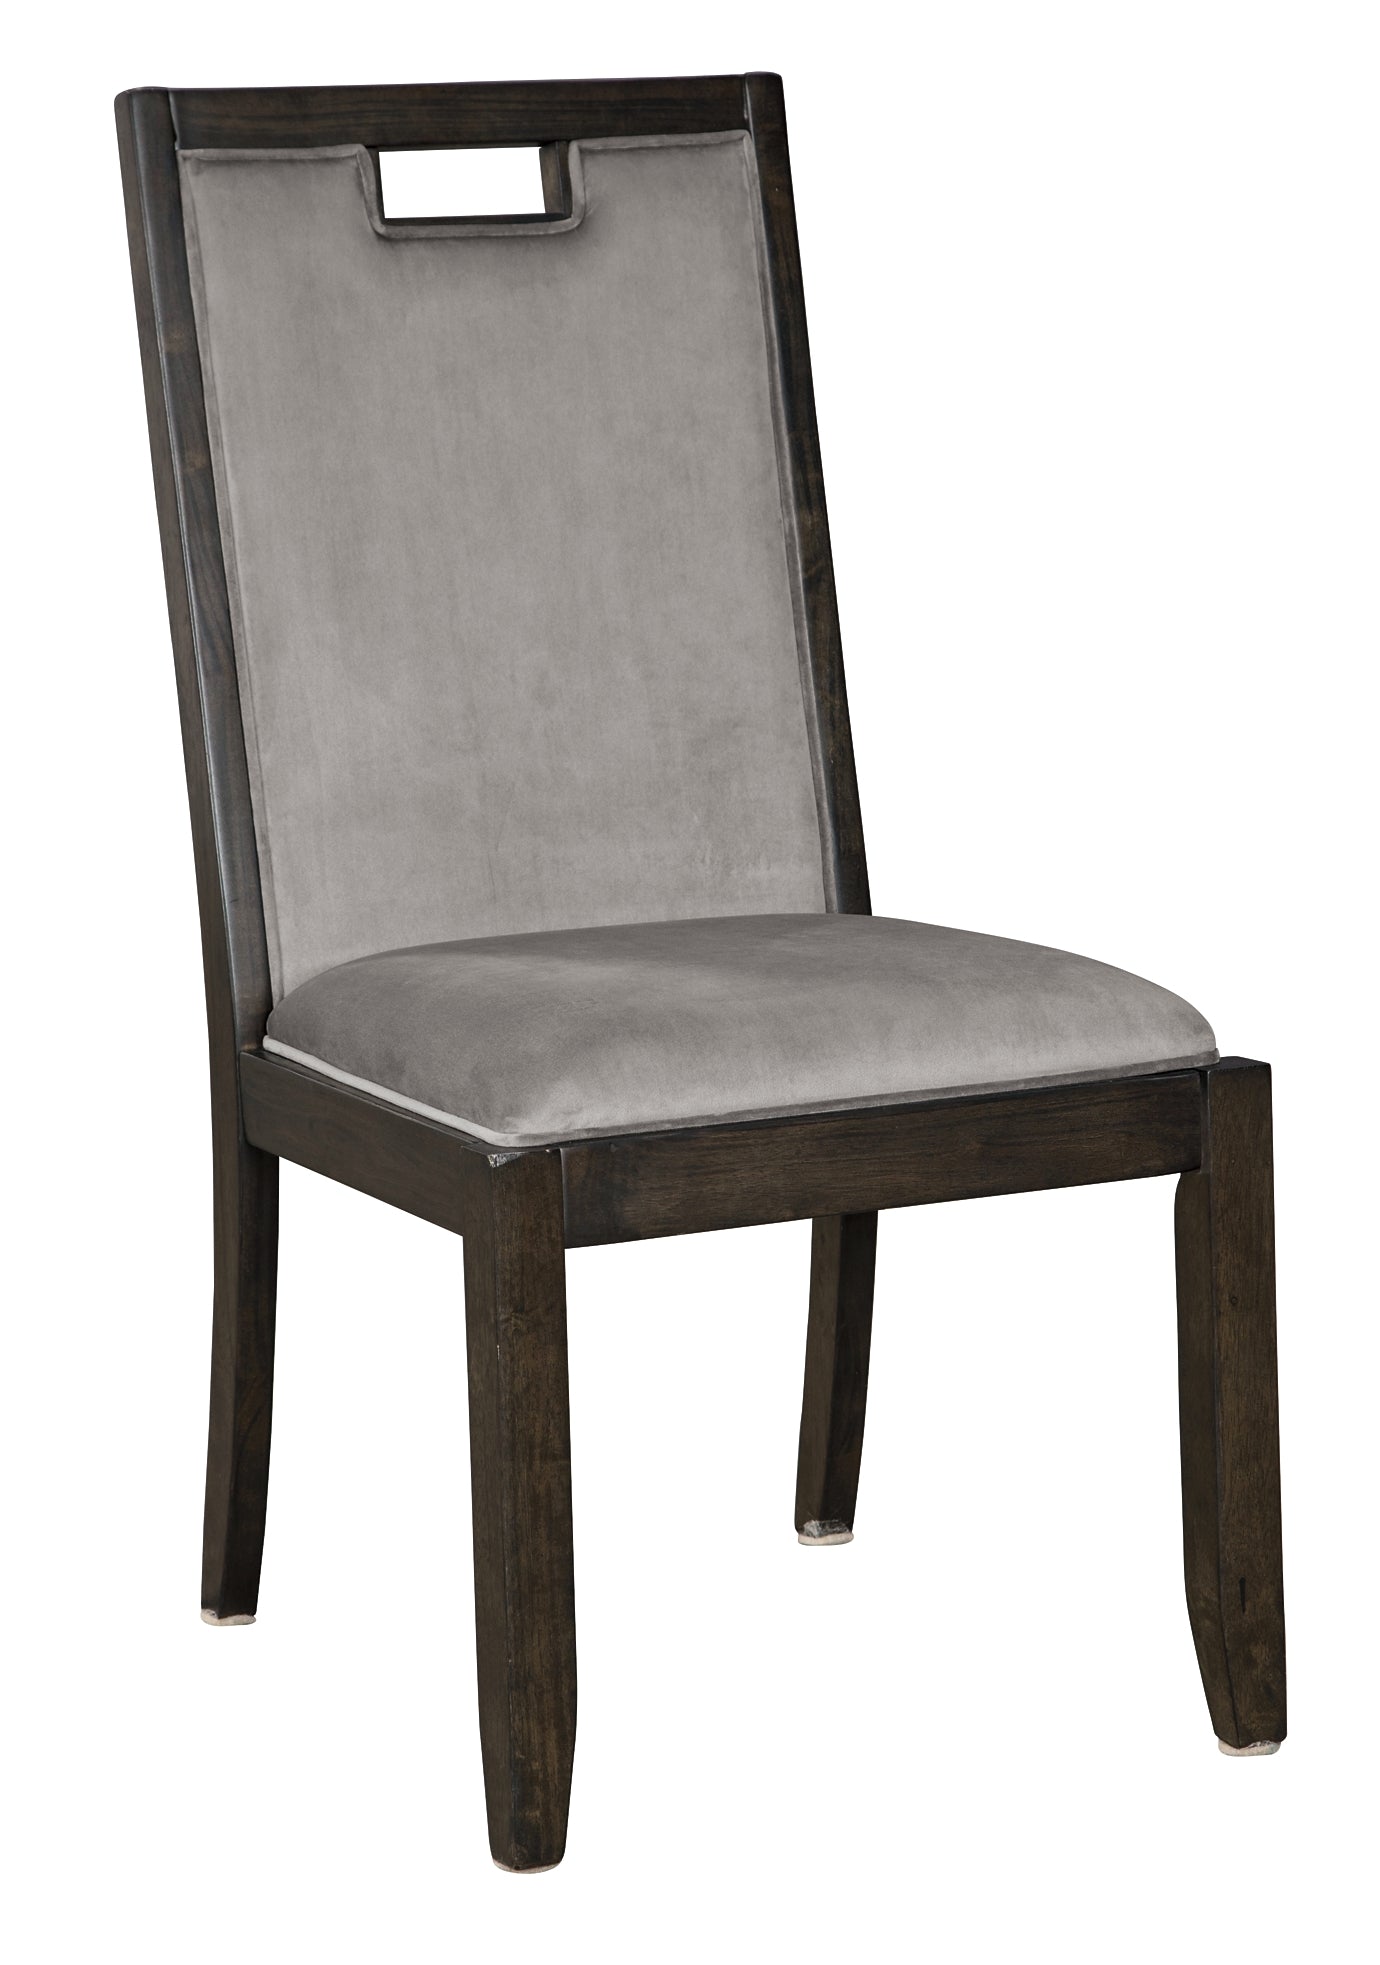 Hyndell Dining Table and 6 Chairs with Storage Milwaukee Furniture of Chicago - Furniture Store in Chicago Serving Humbolt Park, Roscoe Village, Avondale, & Homan Square